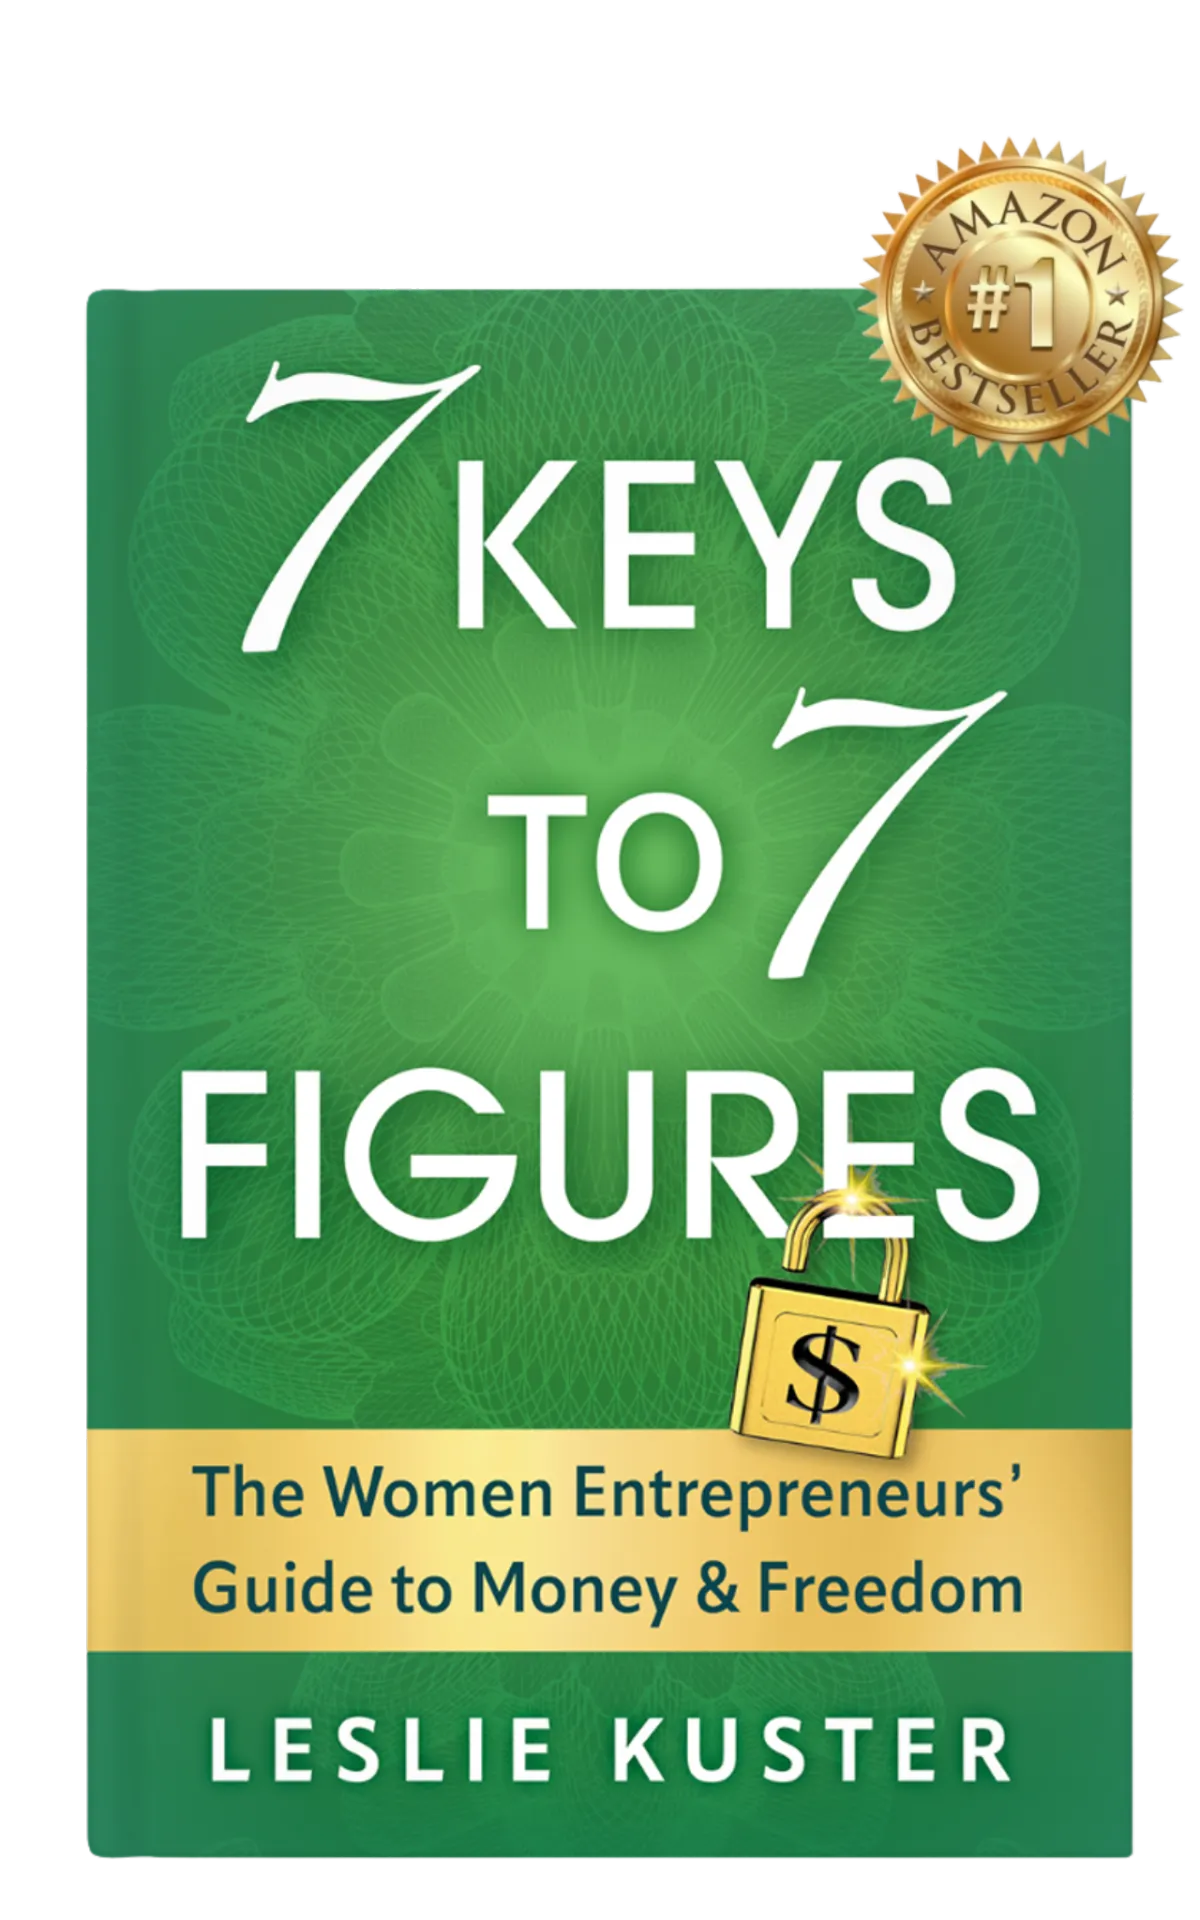 7 Keys To 7 Figures Book Cover